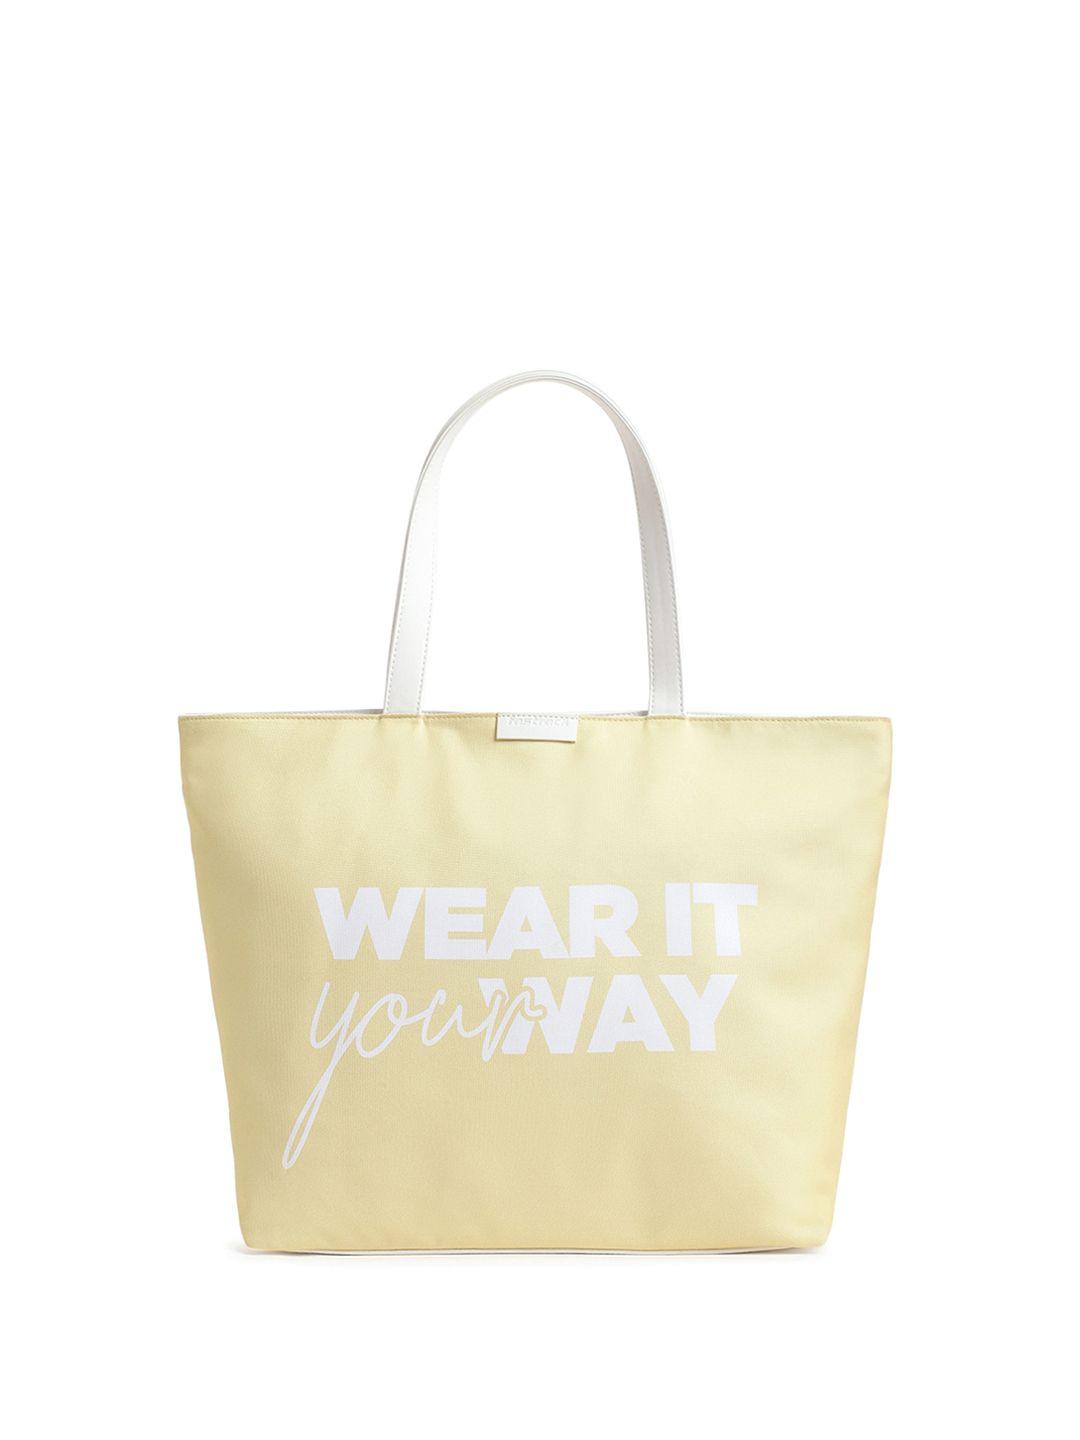 fastrack typography printed oversized shopper tote bag